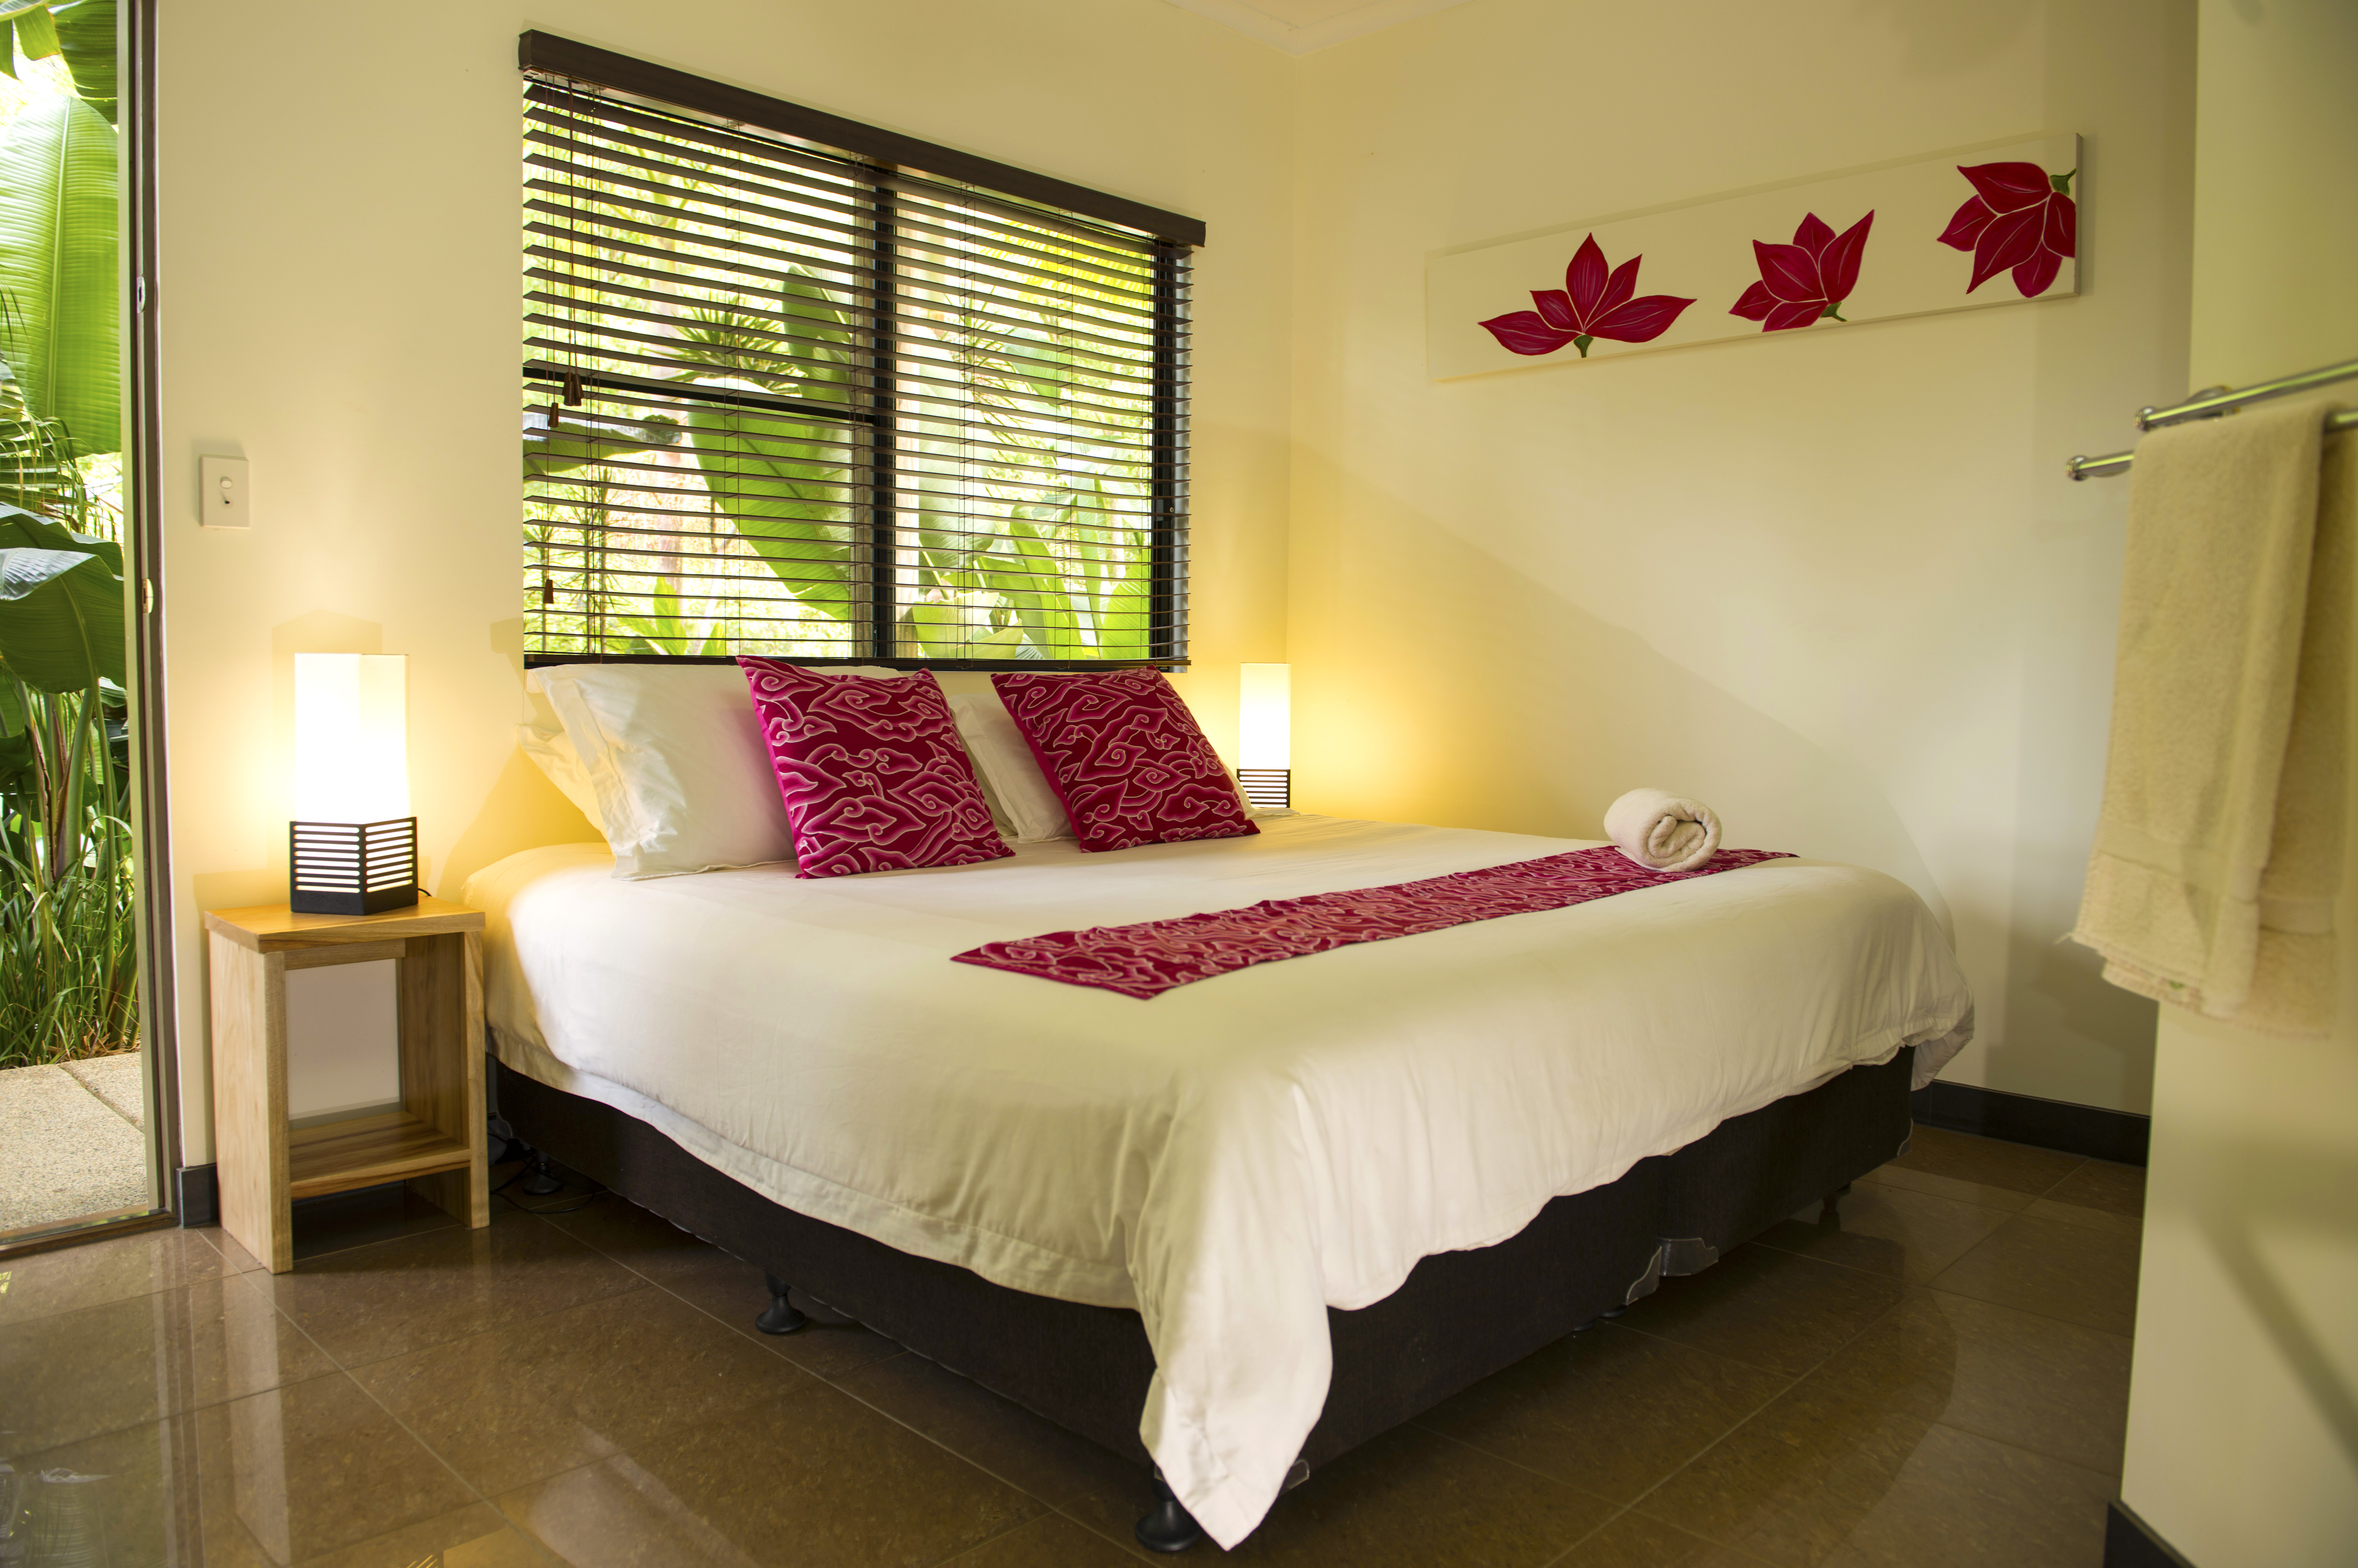 There is a stillness and a sanctuary... let the rooms of Uki Retreat be yours for 3 nights